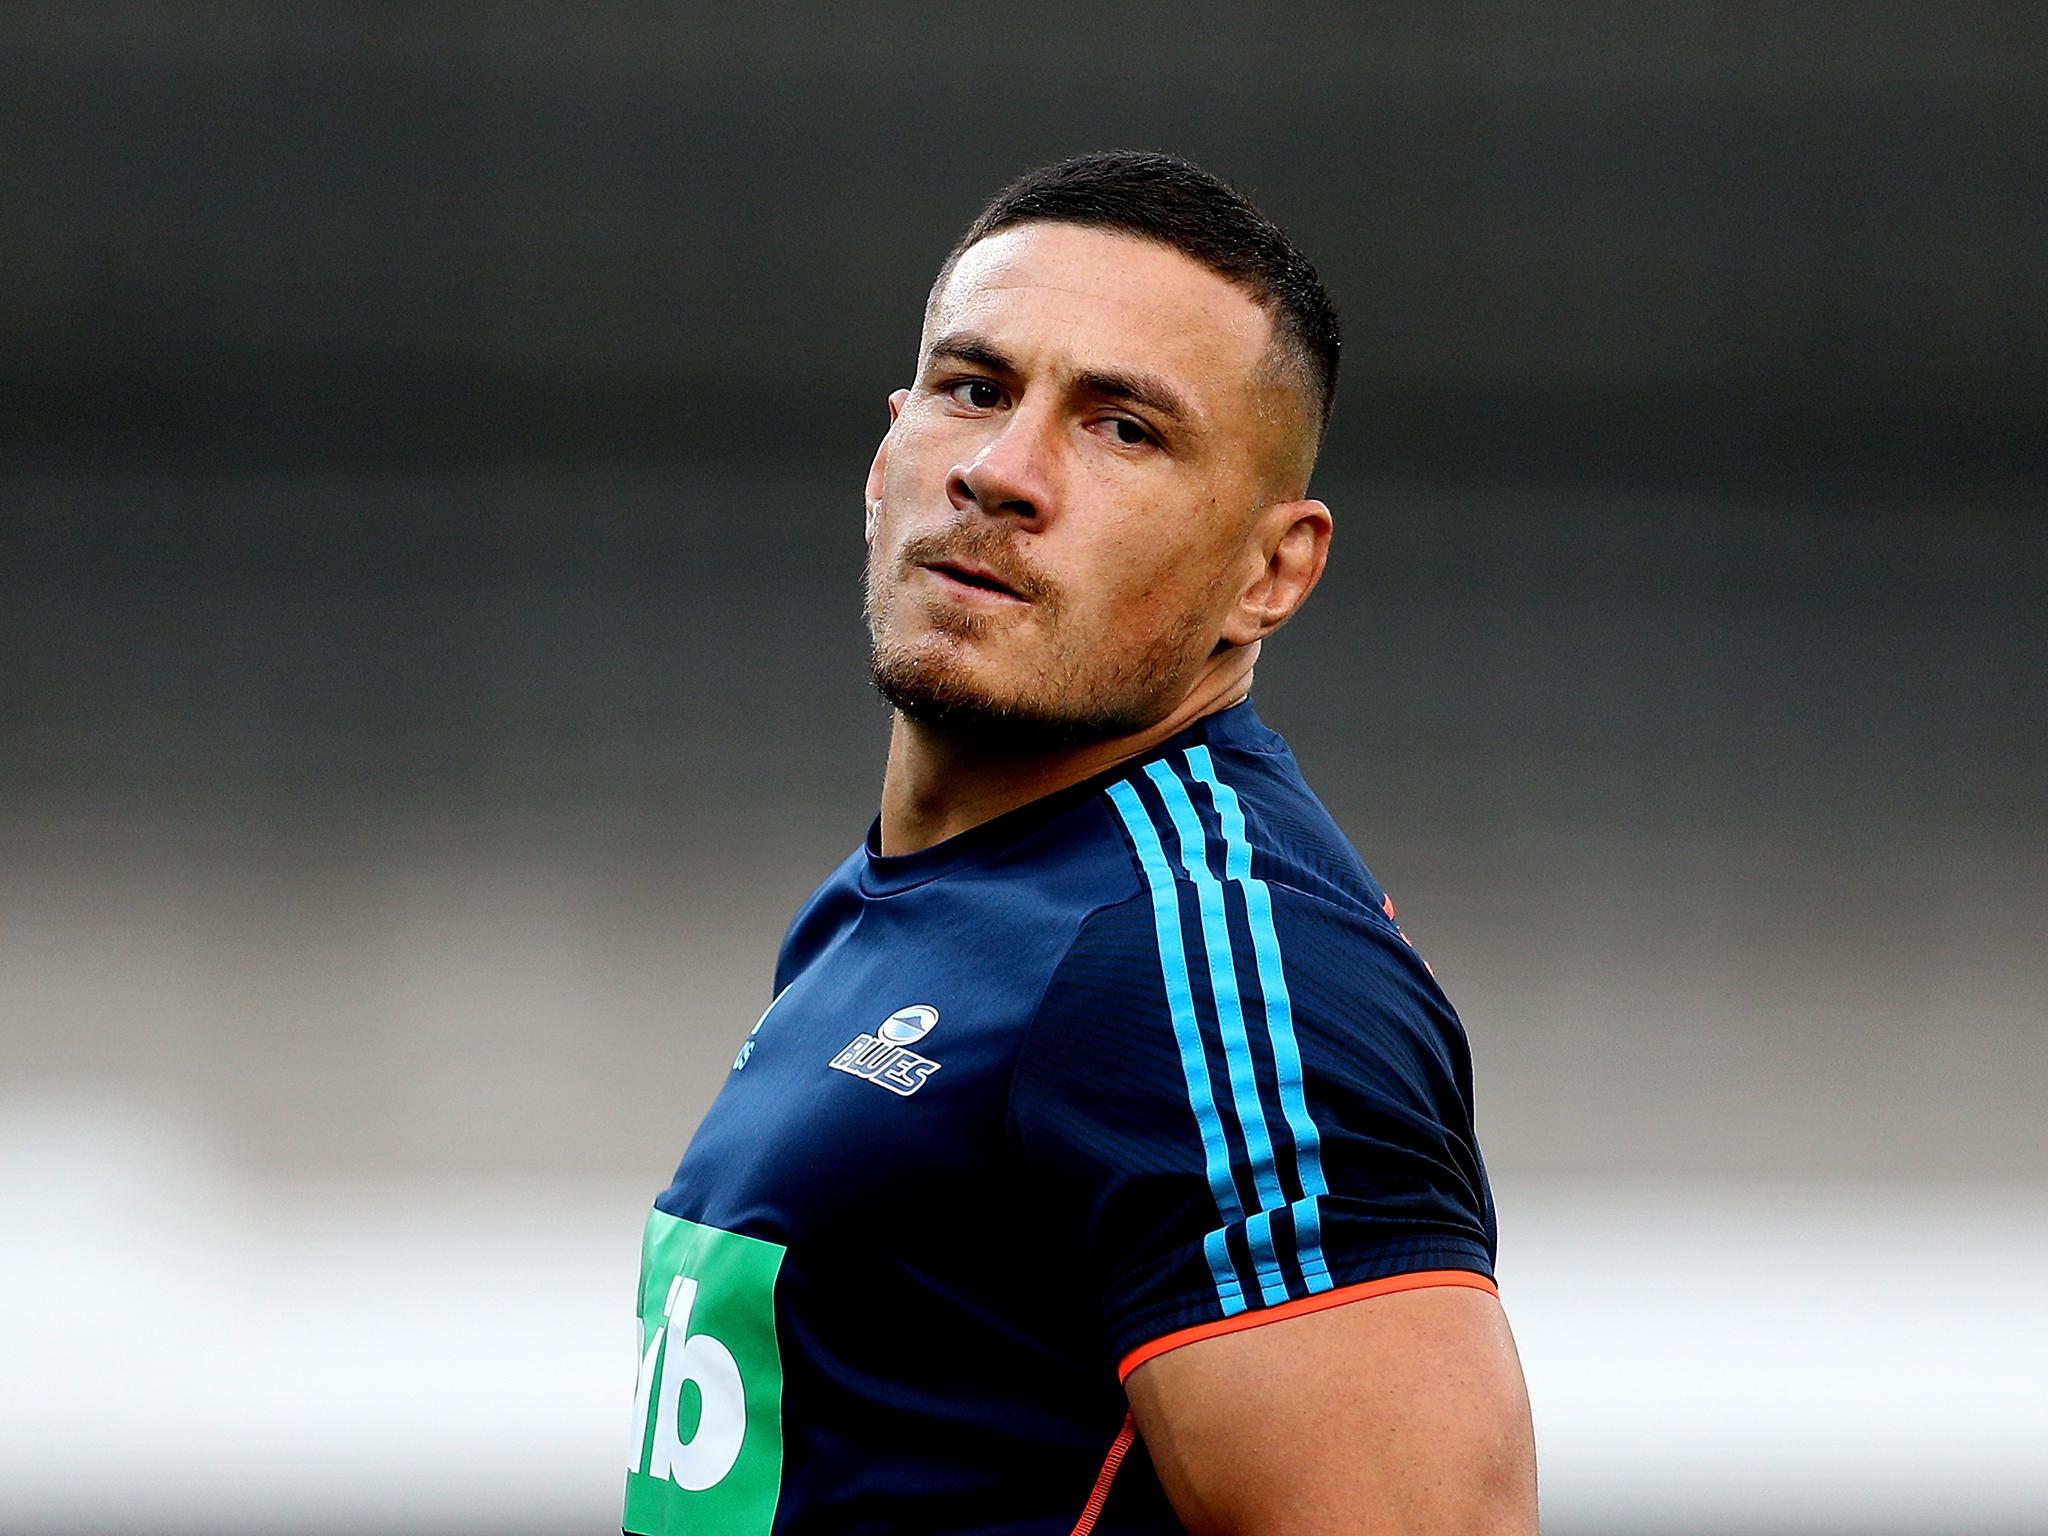 Sonny Bill Williams has committed his future to rugby union after reports linked him with a return to league